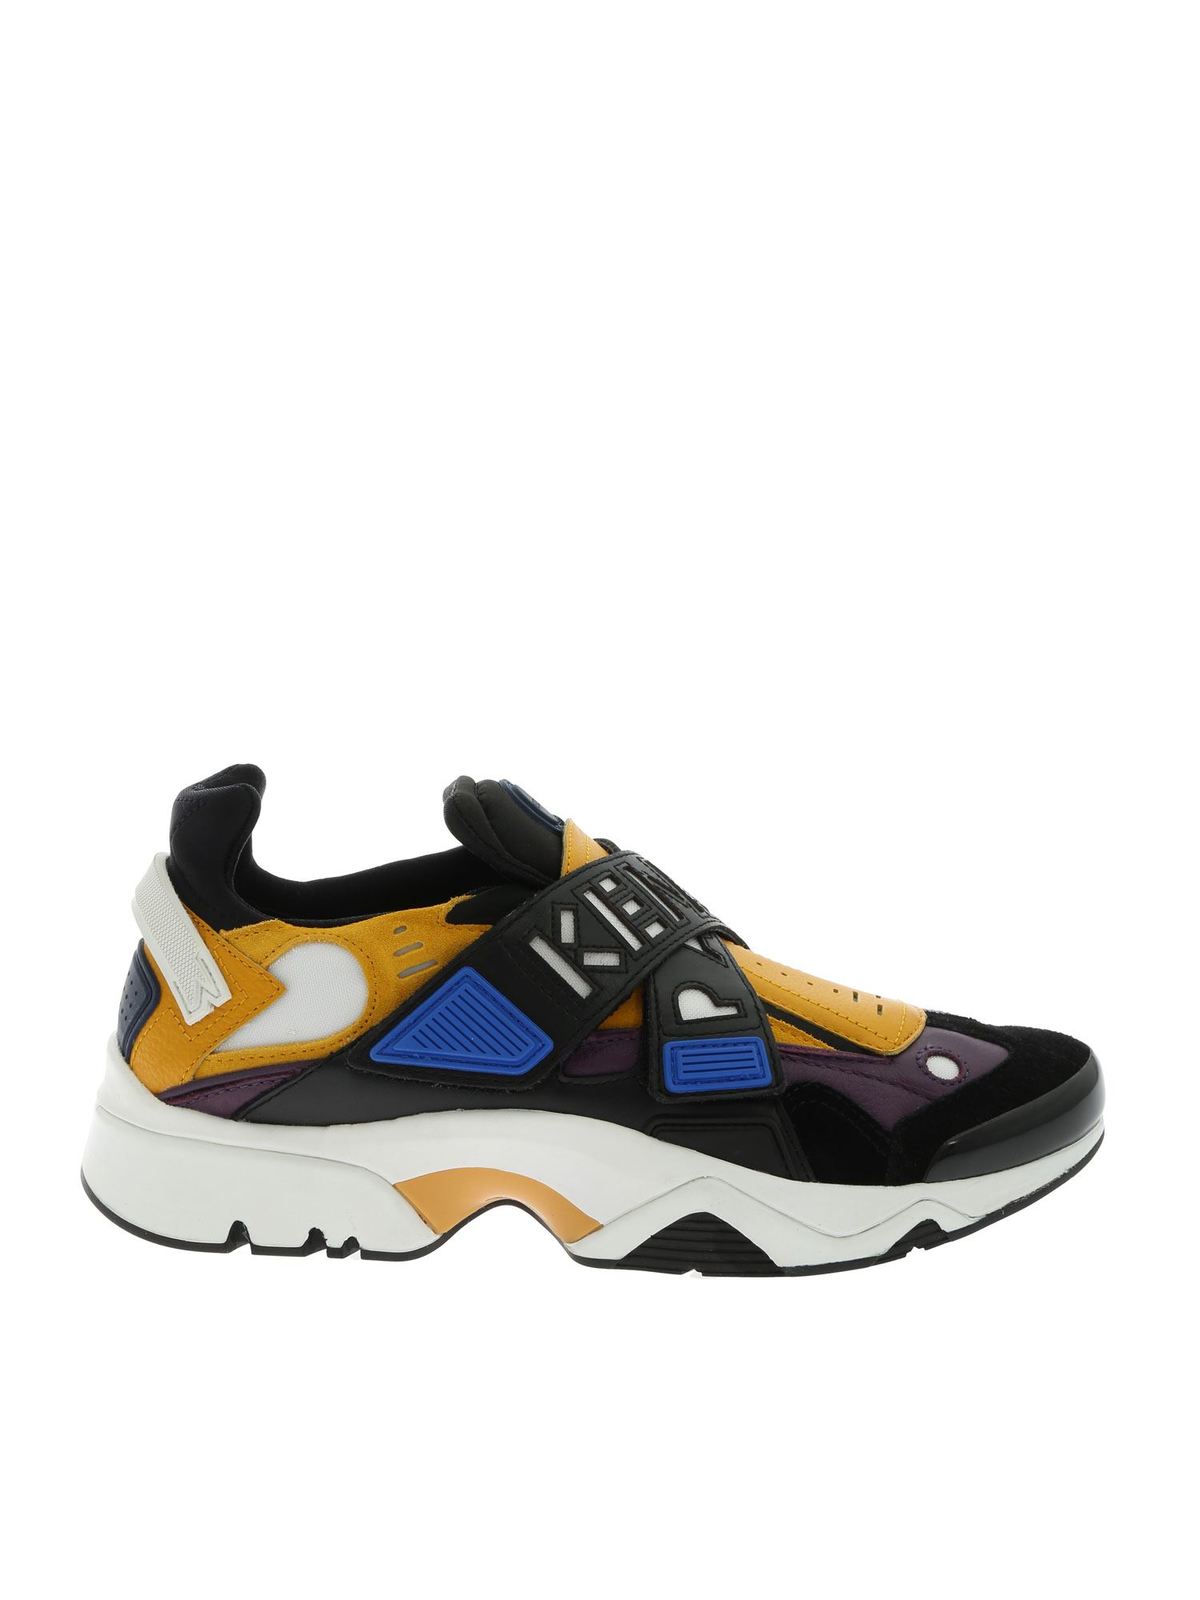 Trainers Kenzo - Sonic Scratch sneakers in black and yellow - 5SN351L5241